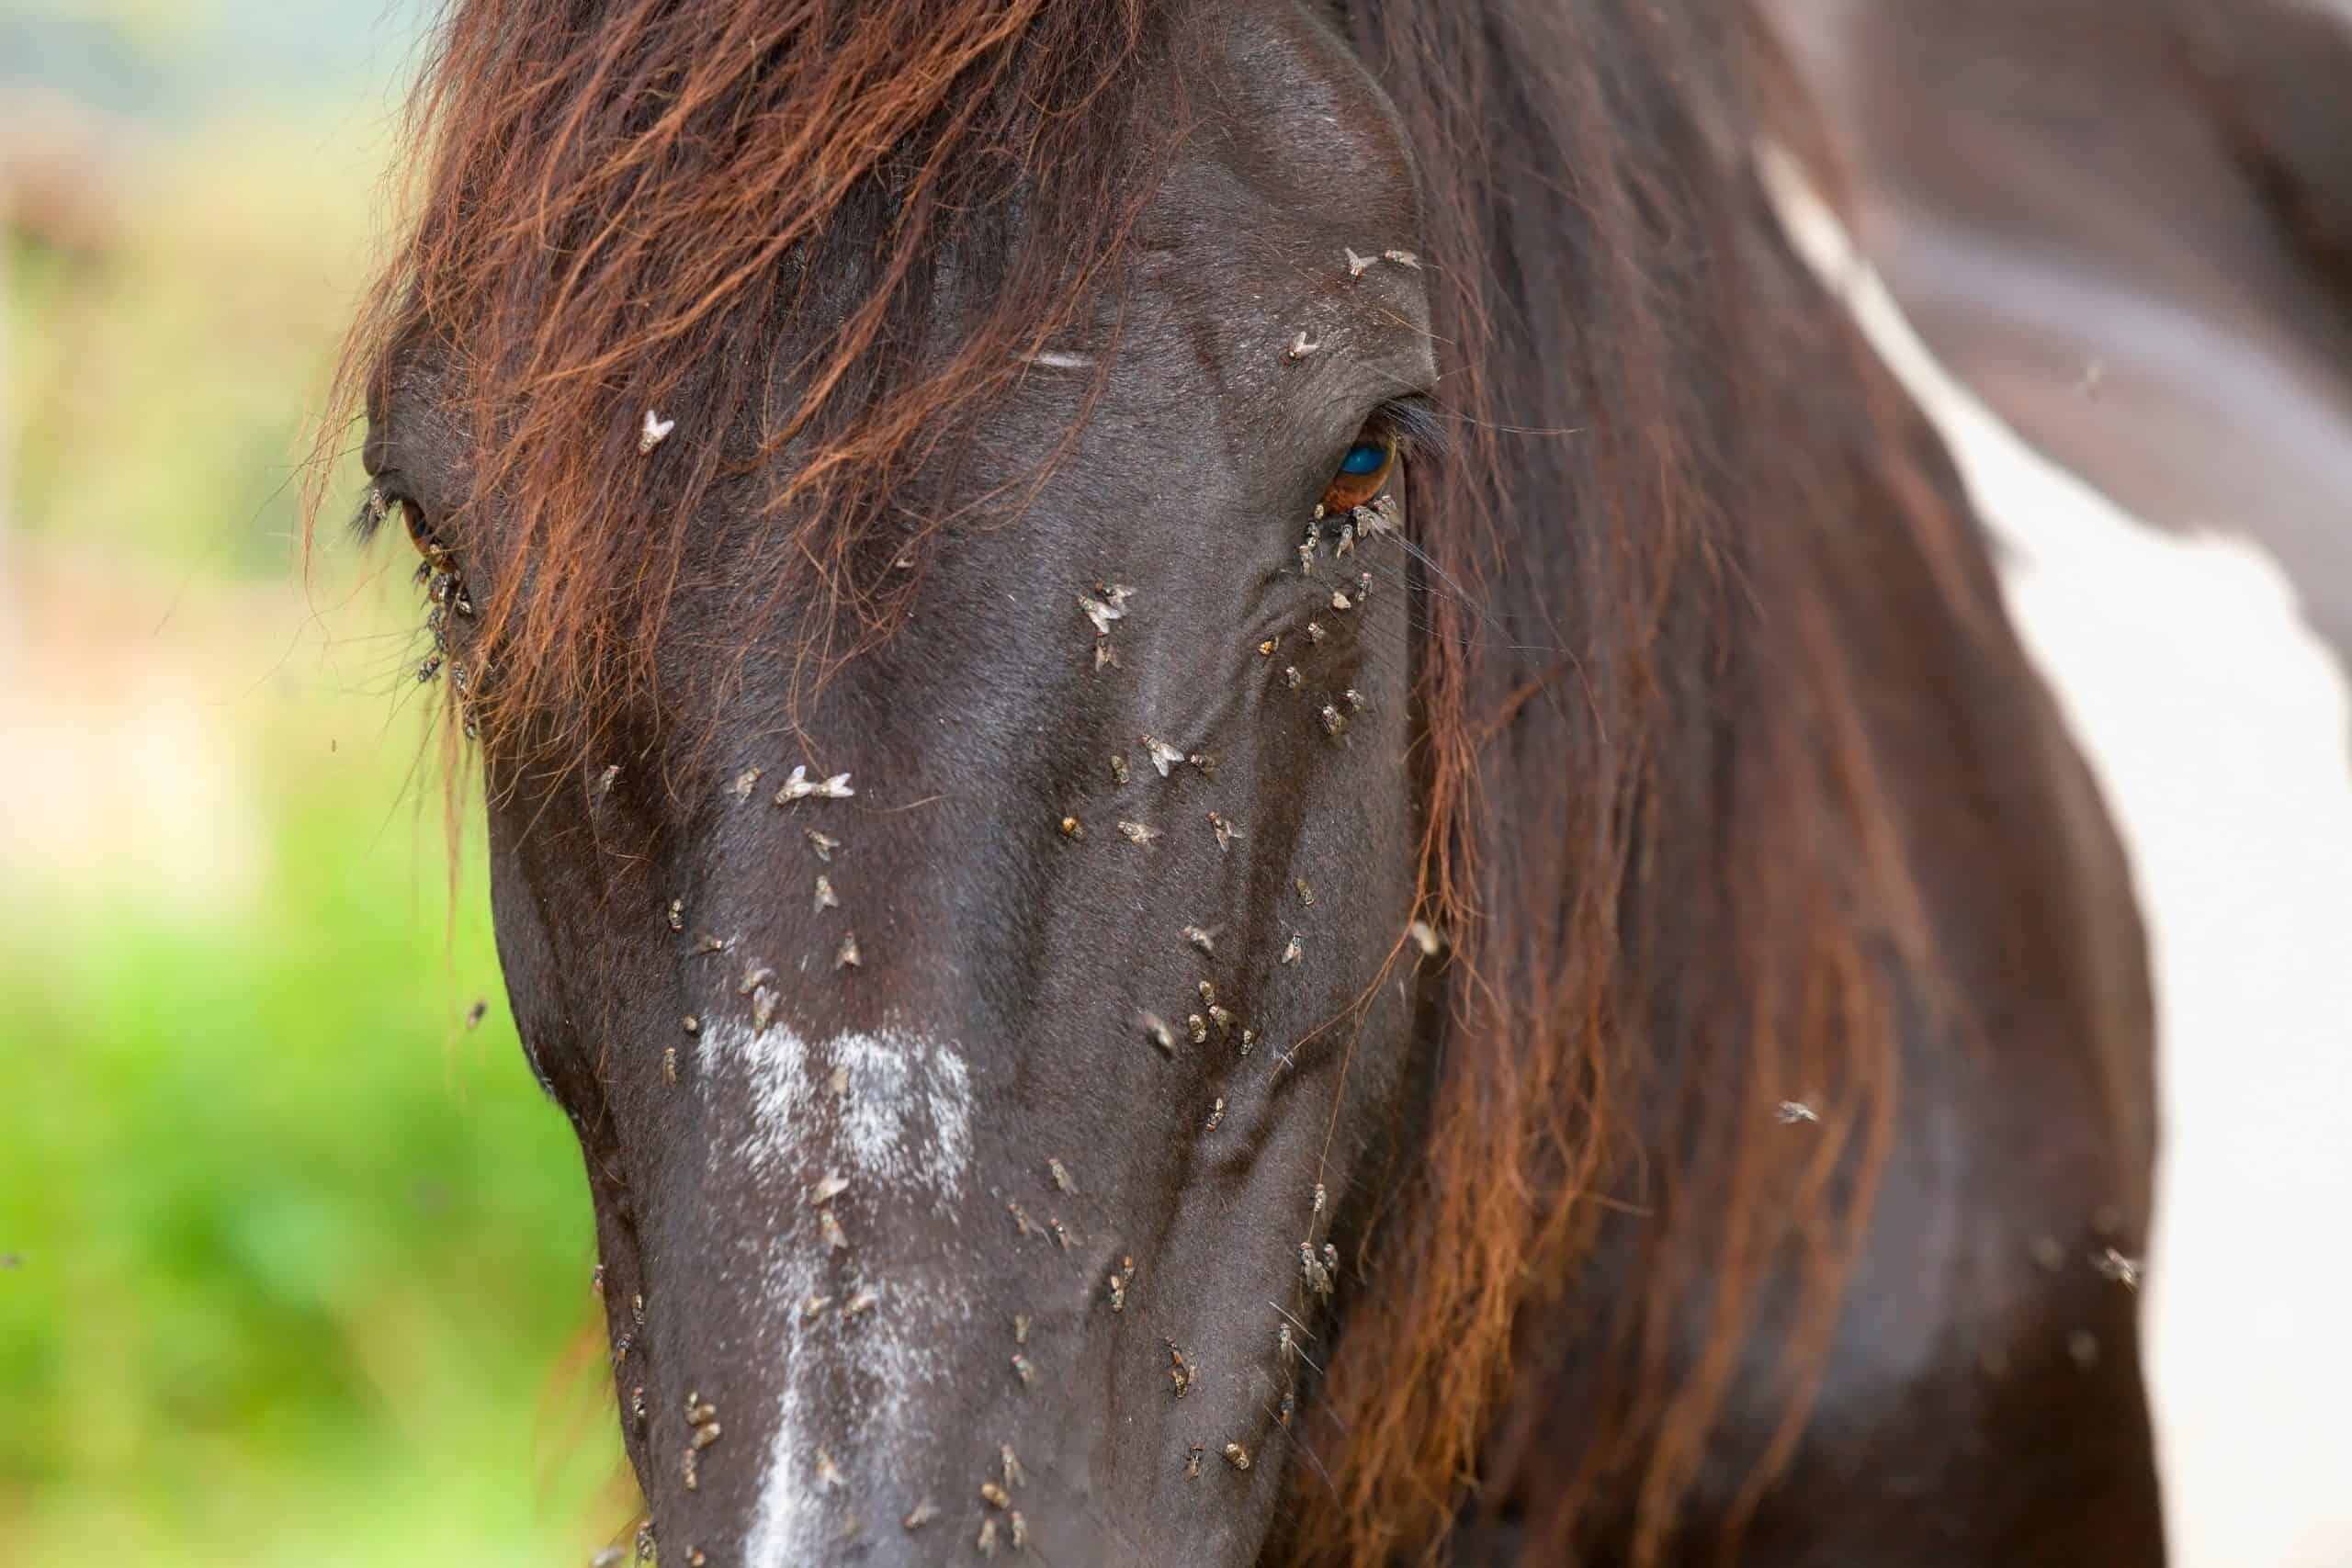 A horse plagued by flies.